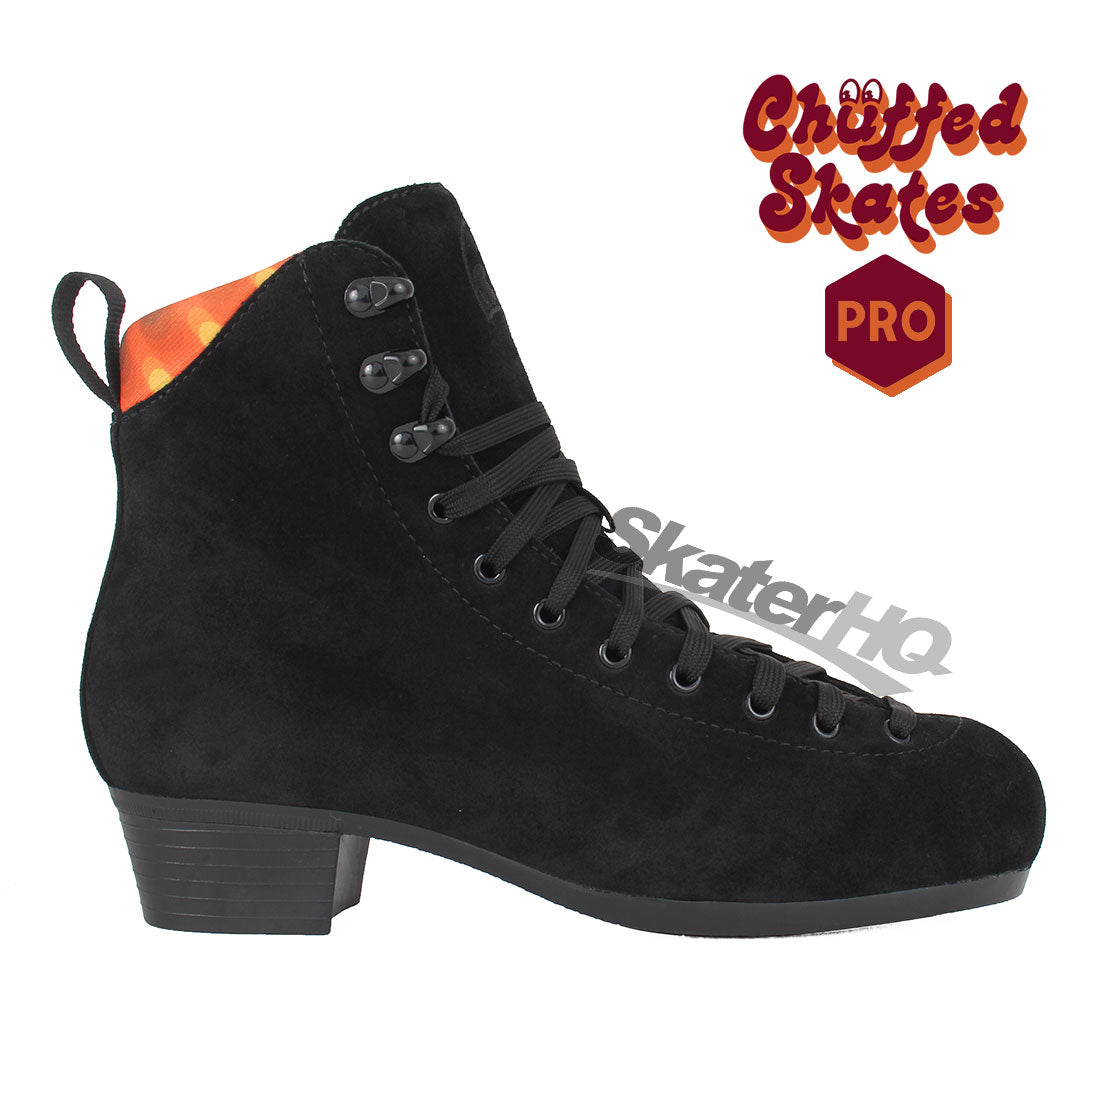 Chuffed Pro Boot Black 5US Roller Skate Boots